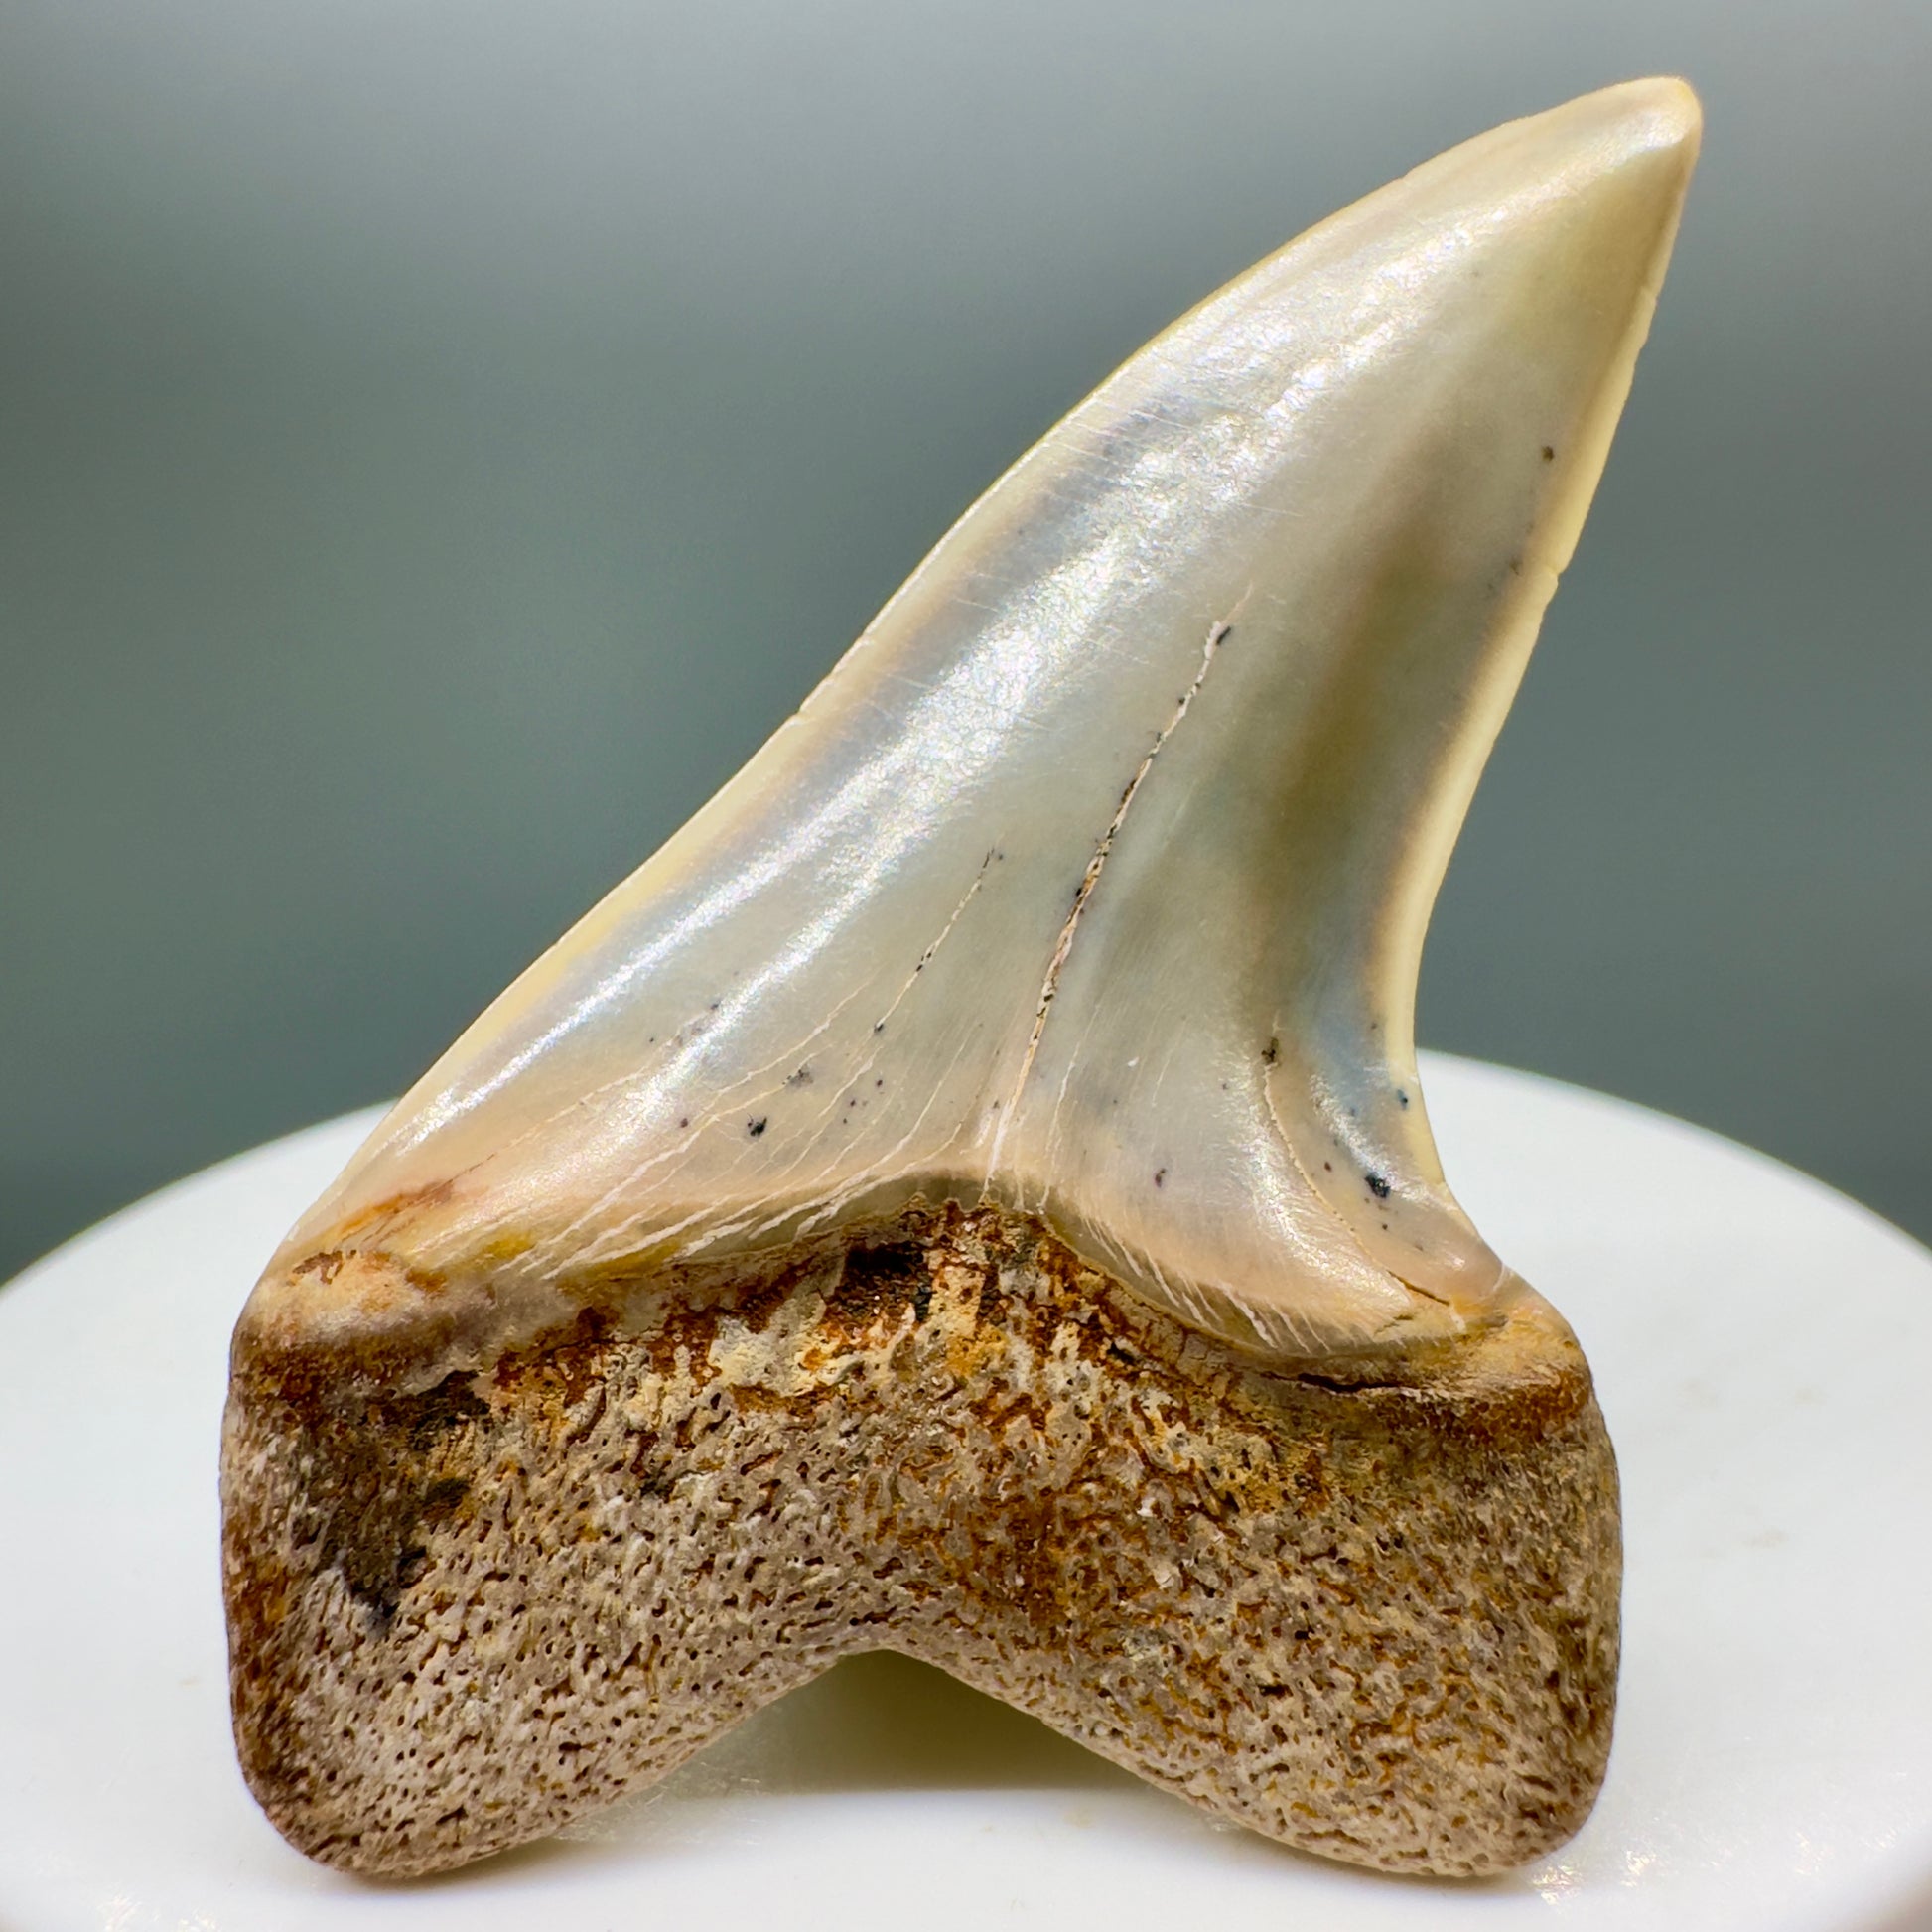 Colorful 1.92" Fossil Extinct Hooked-Tooth Mako - Isurus planus Shark Tooth from Bakersfield, CA M538 - Back